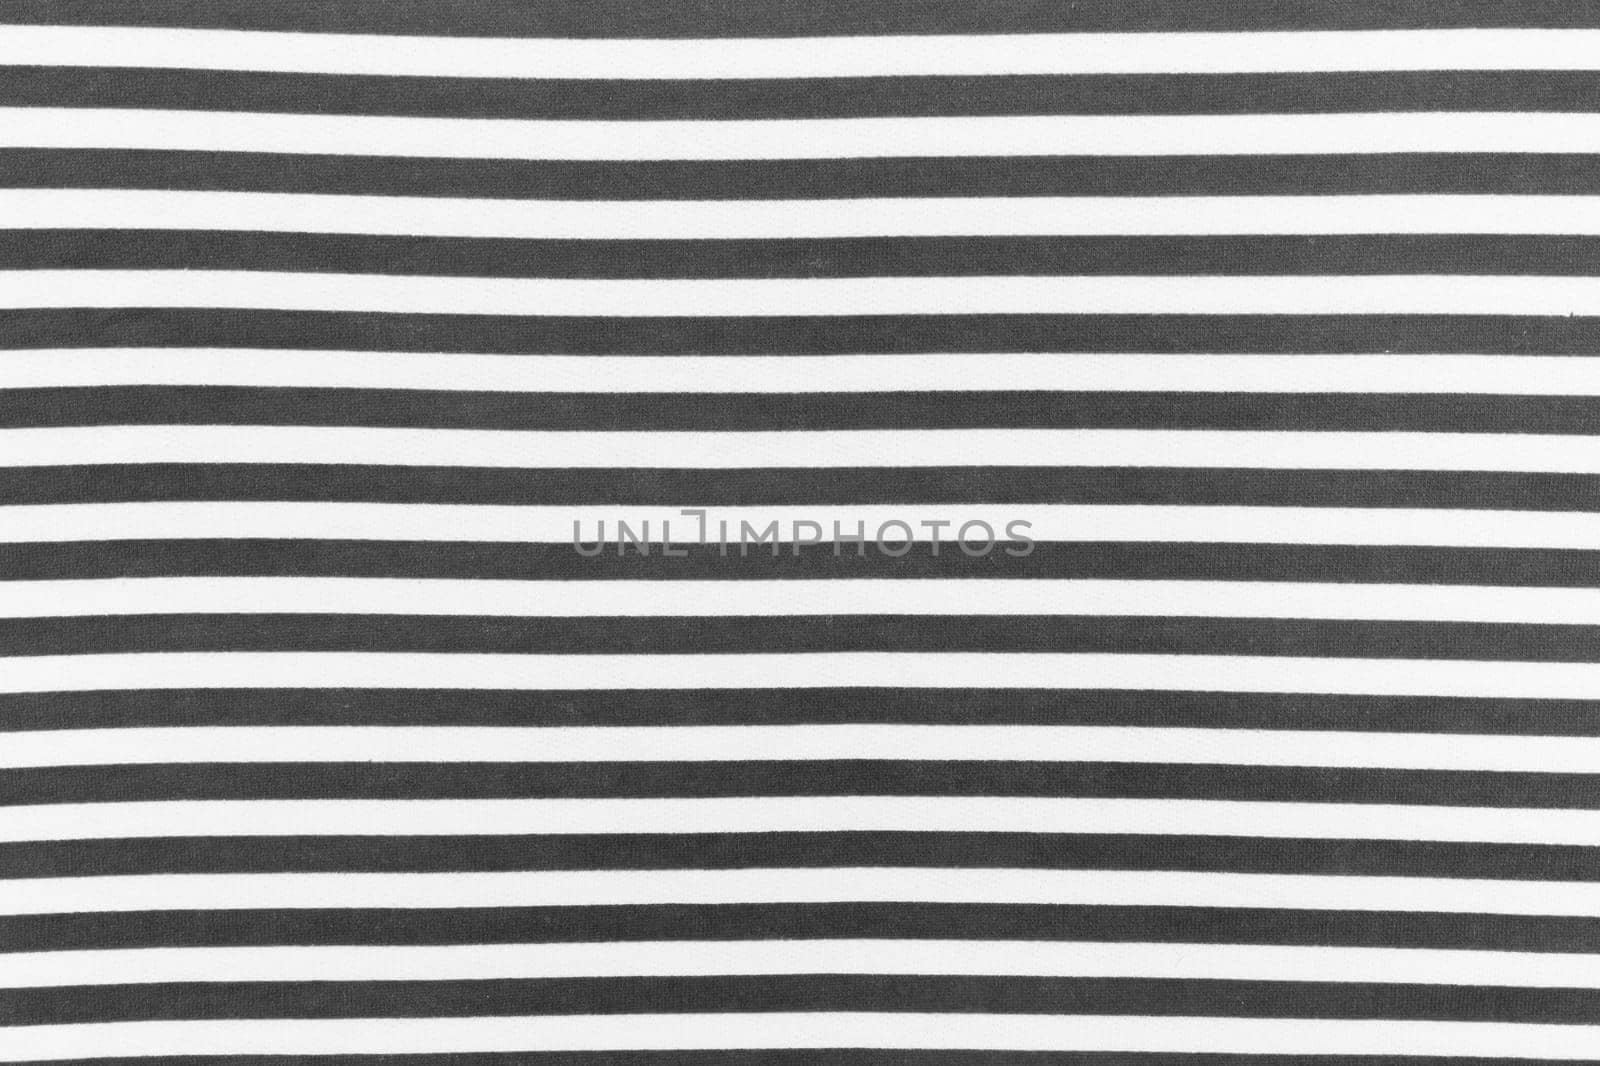 Vintage Color Fabric Abstract Line Pattern Stripe Textile Horizontal Black White Texture Background Style Material Design.